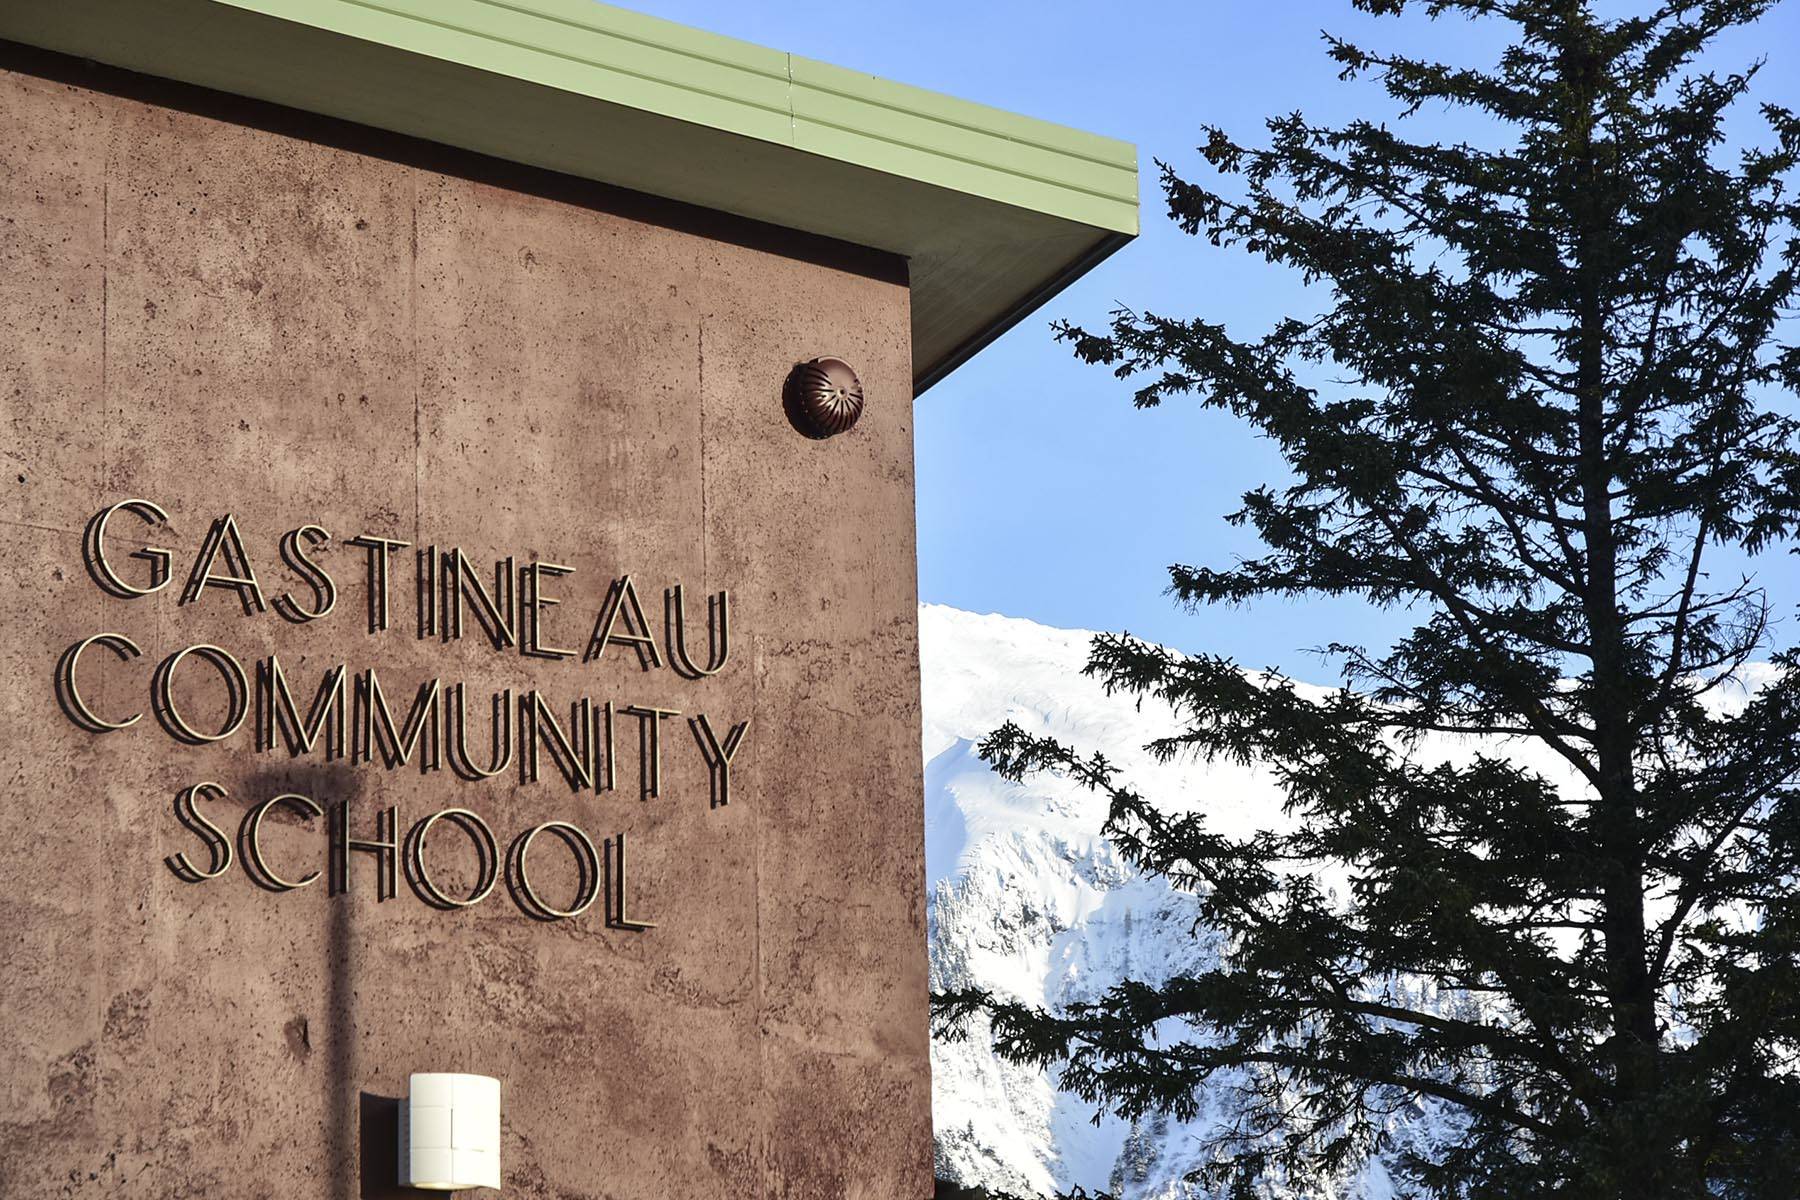 Sayeik: Gastineau Community School was closed Friday, March 13, over COVID-19 concerns after a student was tested for “multiple viruses,” according to the Juneau School District and City and Borough of Juneau.(Peter Segall | Juneau Empire)